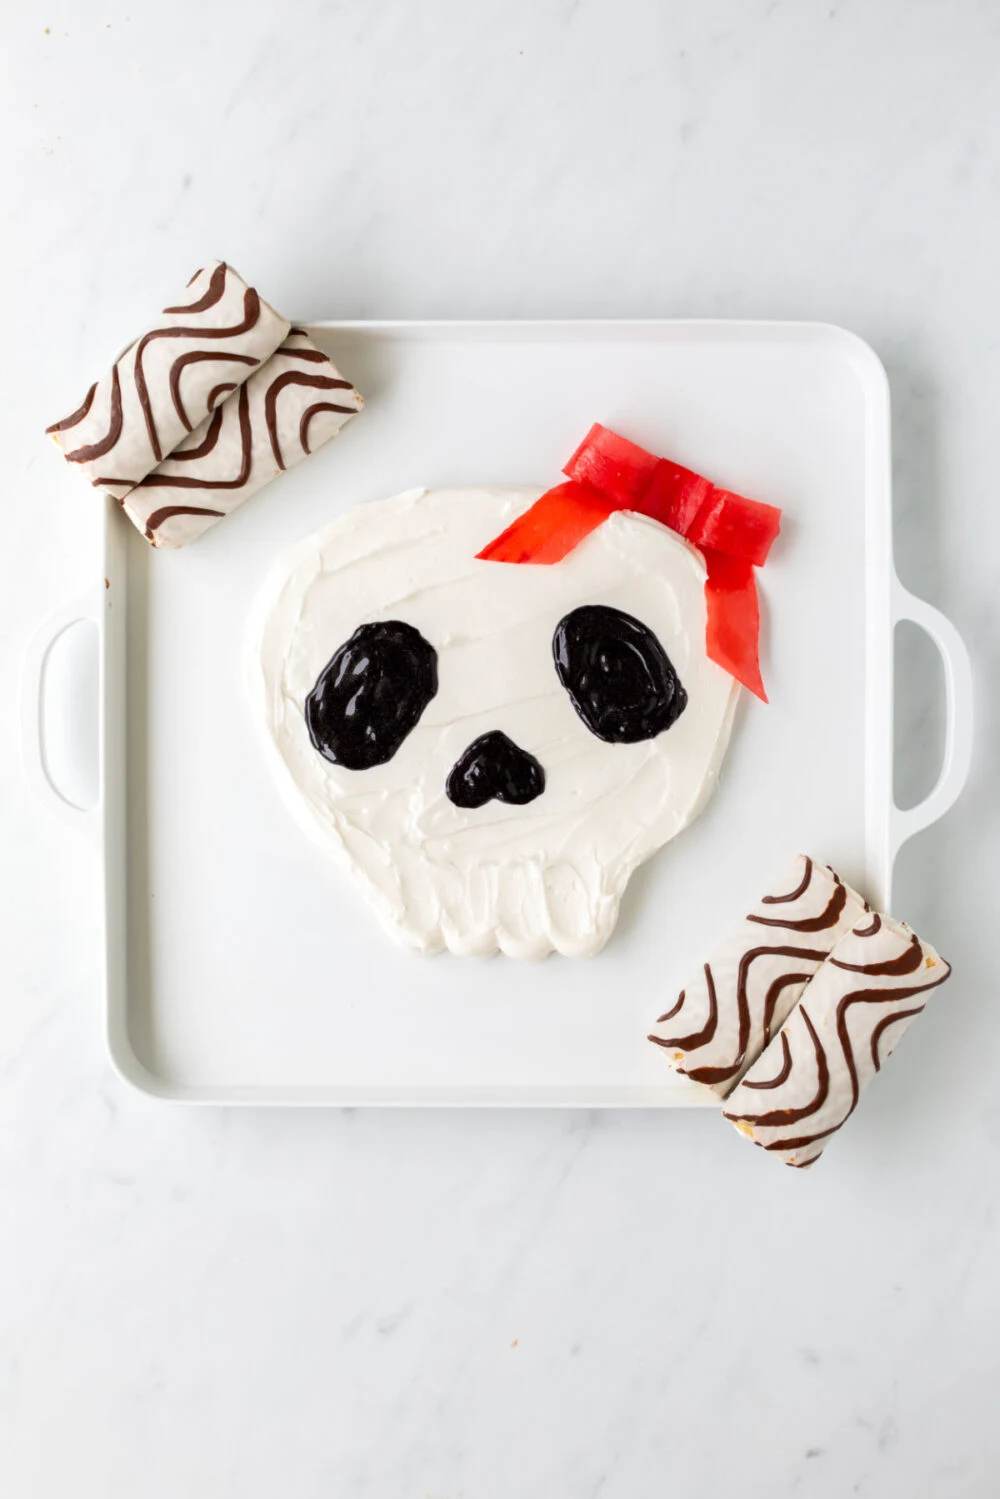 Zebra cakes at the corners of the frosting skull board. 